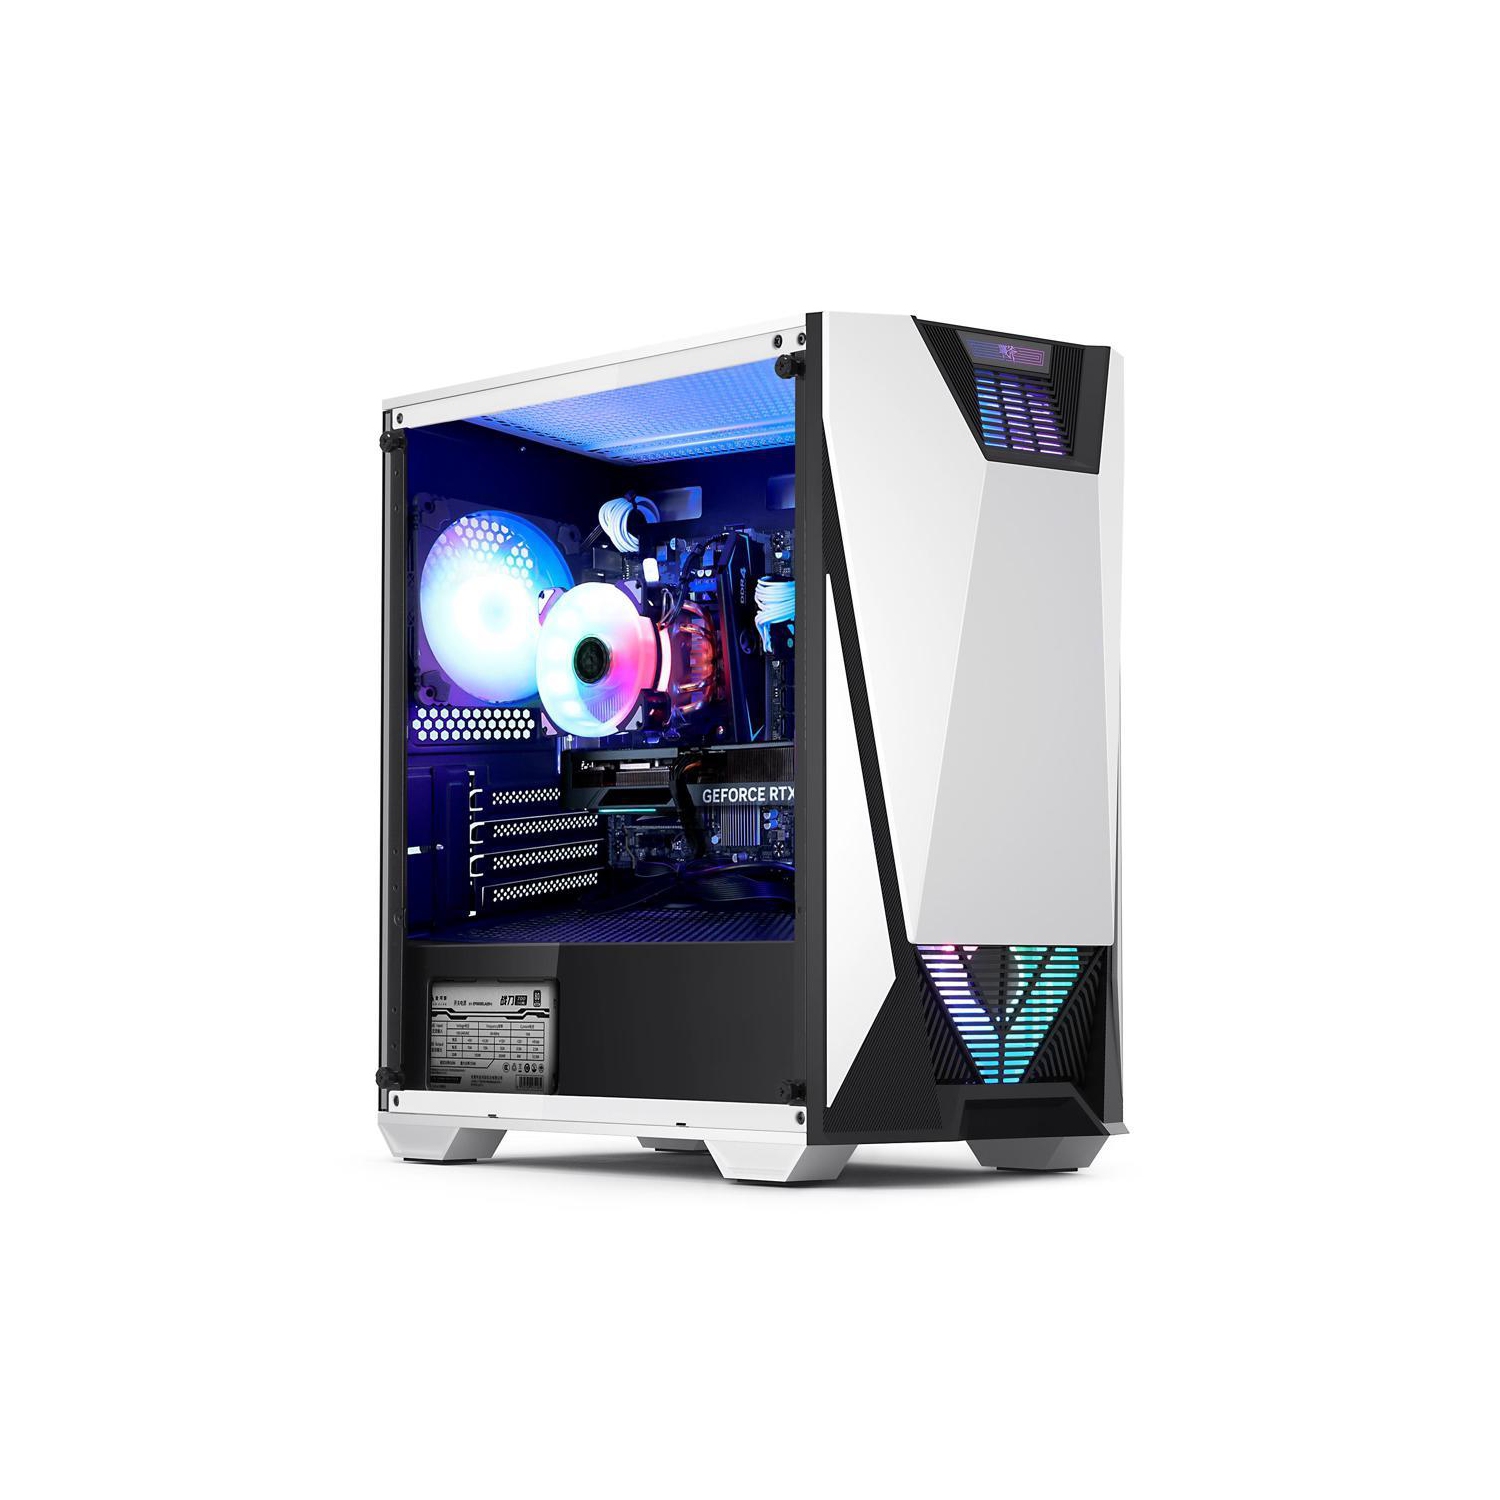 Hoengager Battleaxe Gaming - Intel Core i5-12400F 6-Core 2.5 GHz-NVIDIA GeForce RTX 3060 Ti- 16GB DDR4 3200MHz - 1TB+500GB M.2 NVMe SSD- WIFI -RGB Fans - Windows 11 Pro Computer